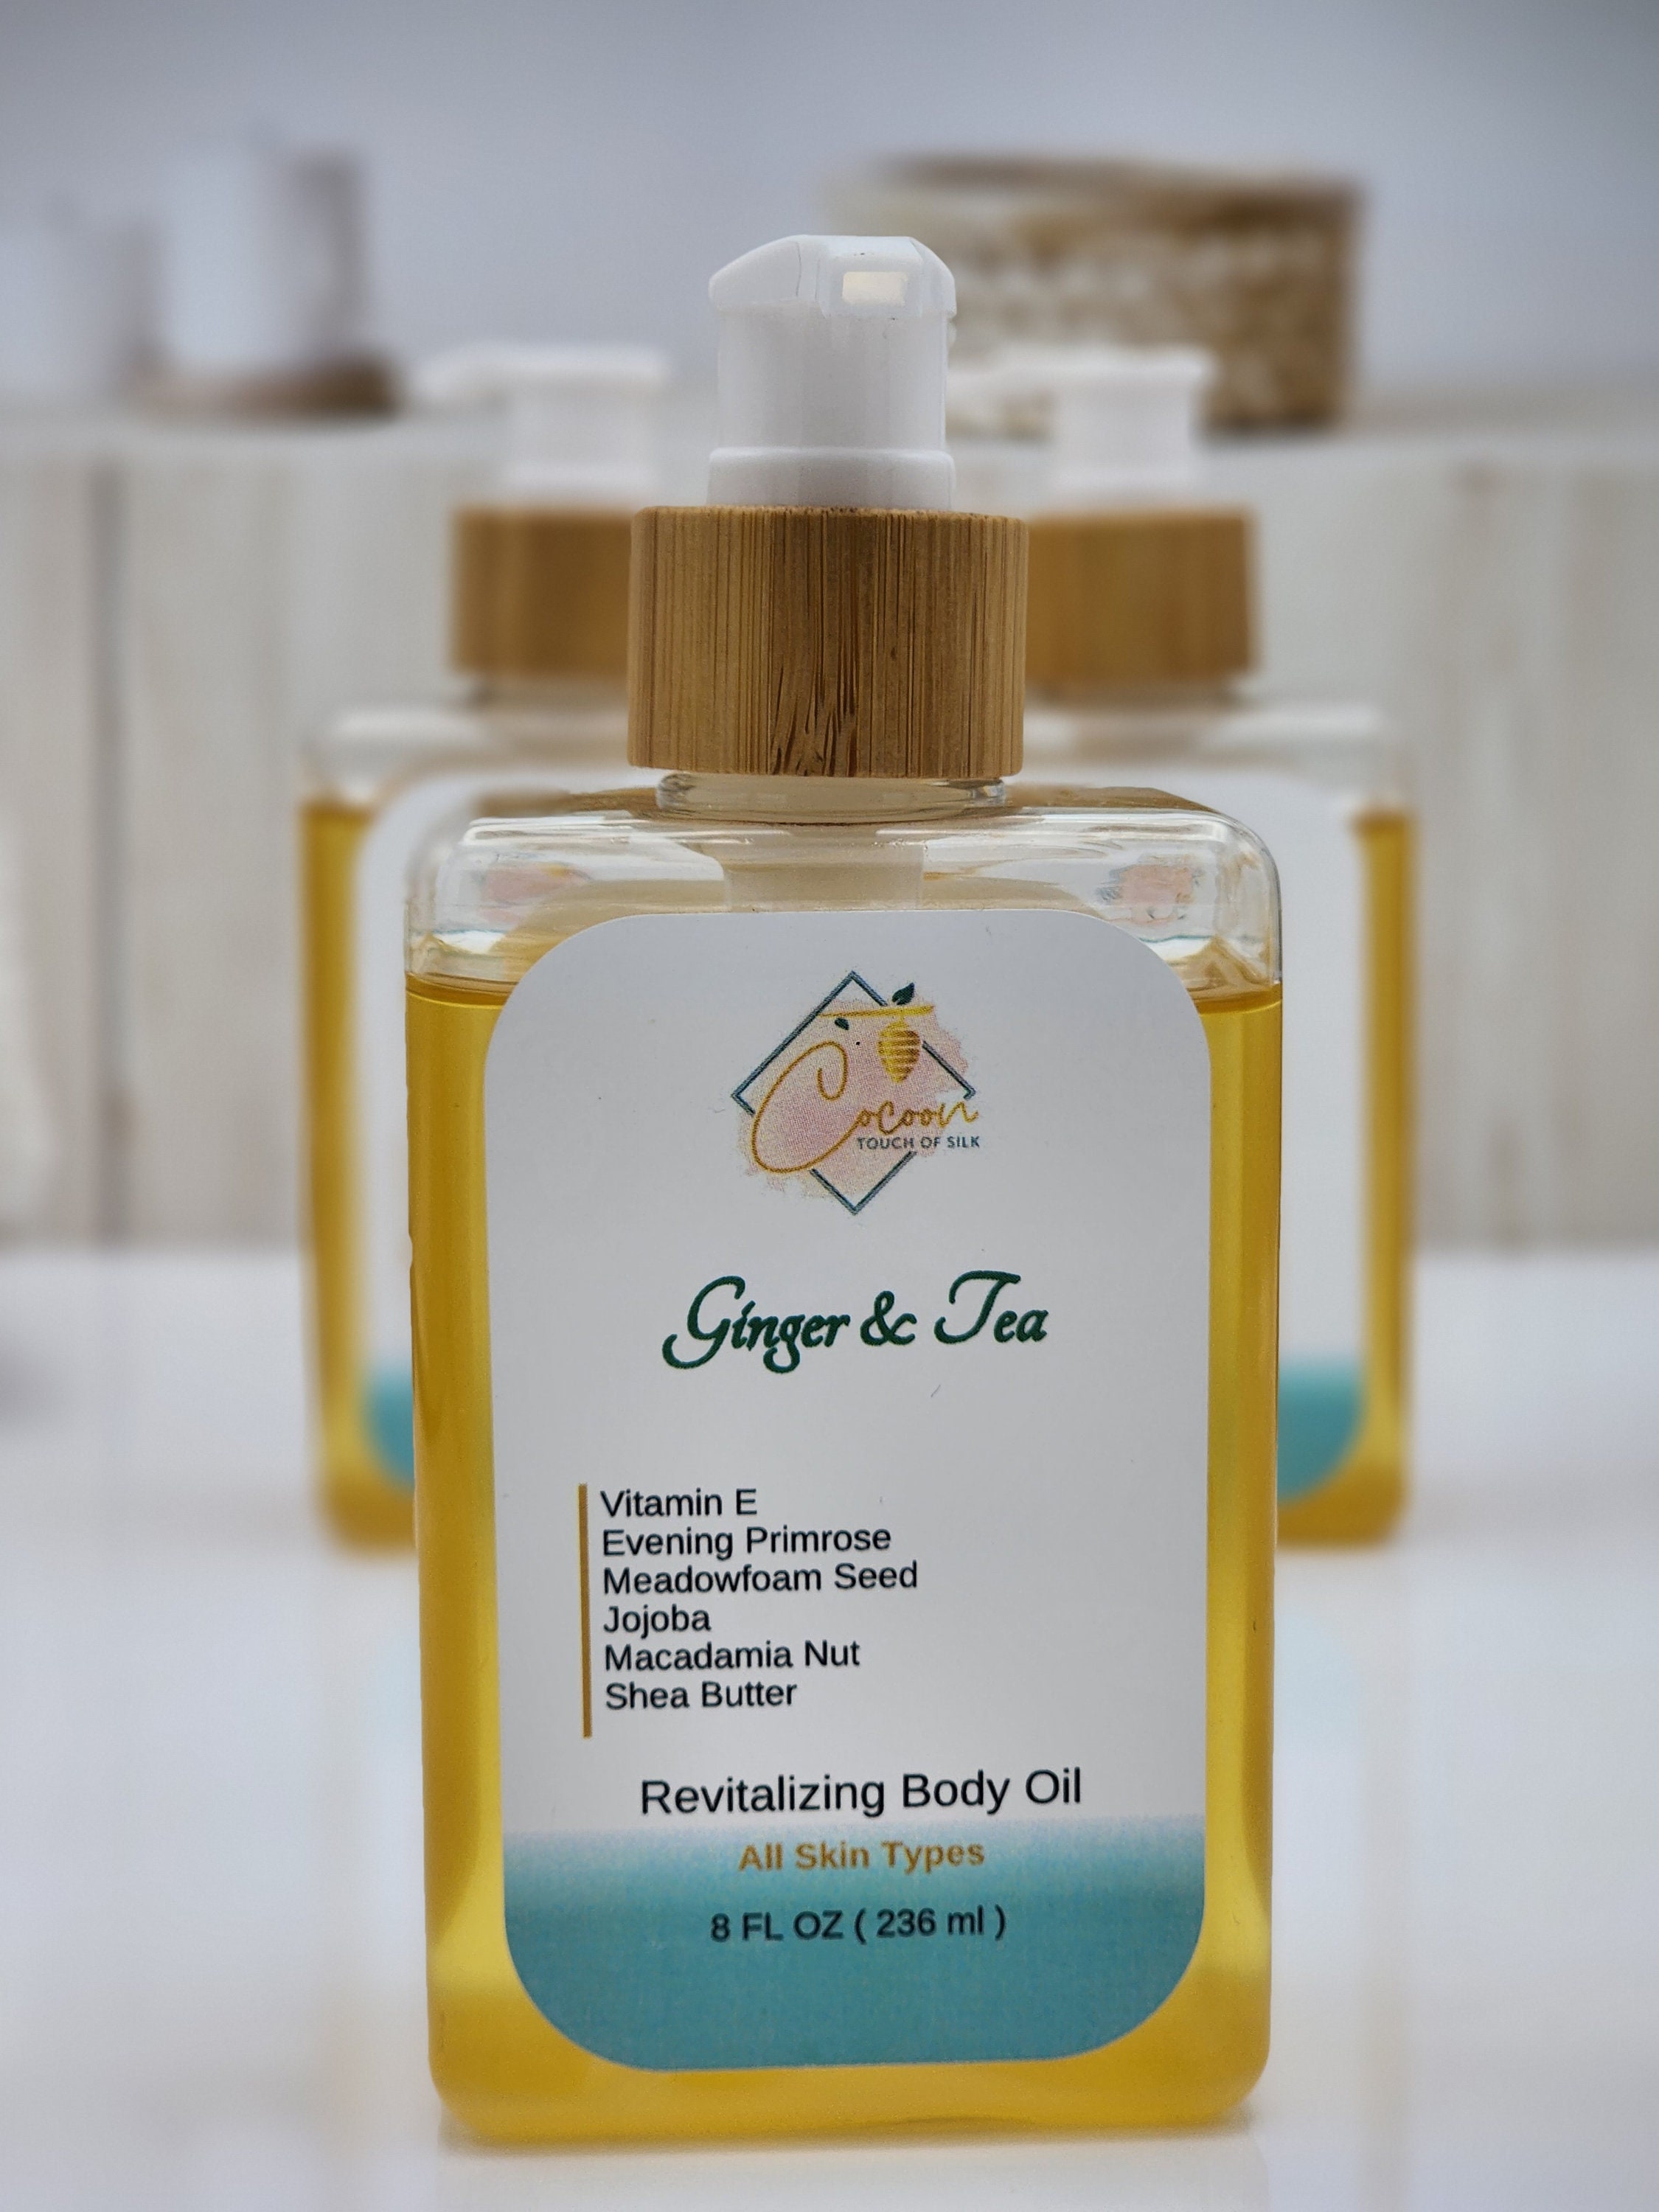 Dry Body Oil – Indulgence Spa and Body Products